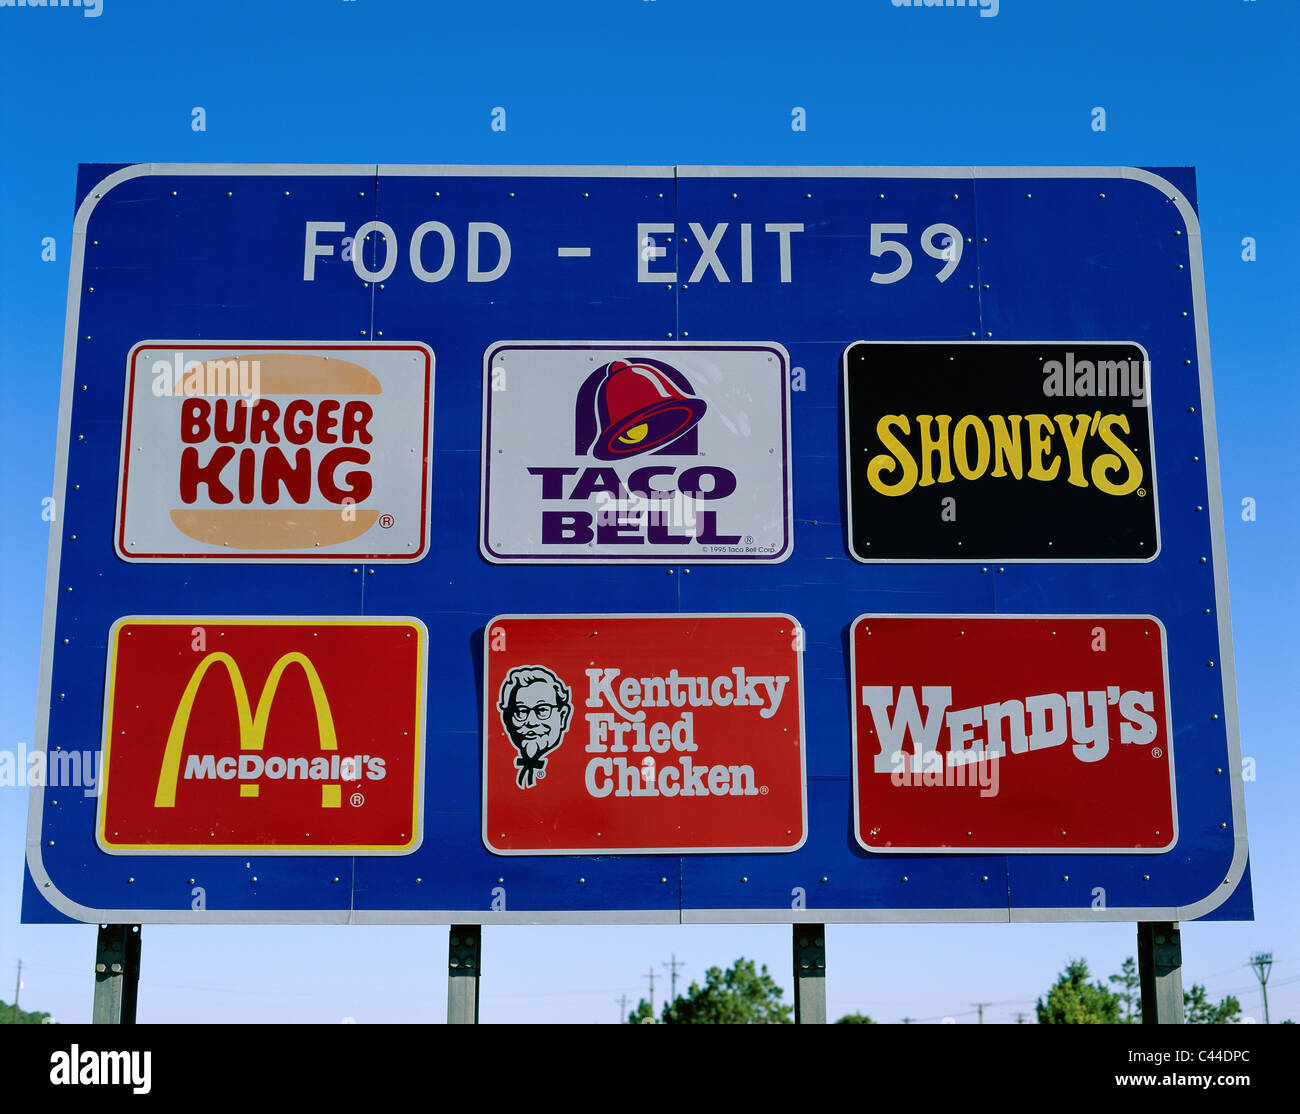 Advertising, America, California, Exit, Fast food, Highway, Holiday, Landmark, Outlets, Restaurants, Sign, Tourism, Travel, Typi Stock Photo